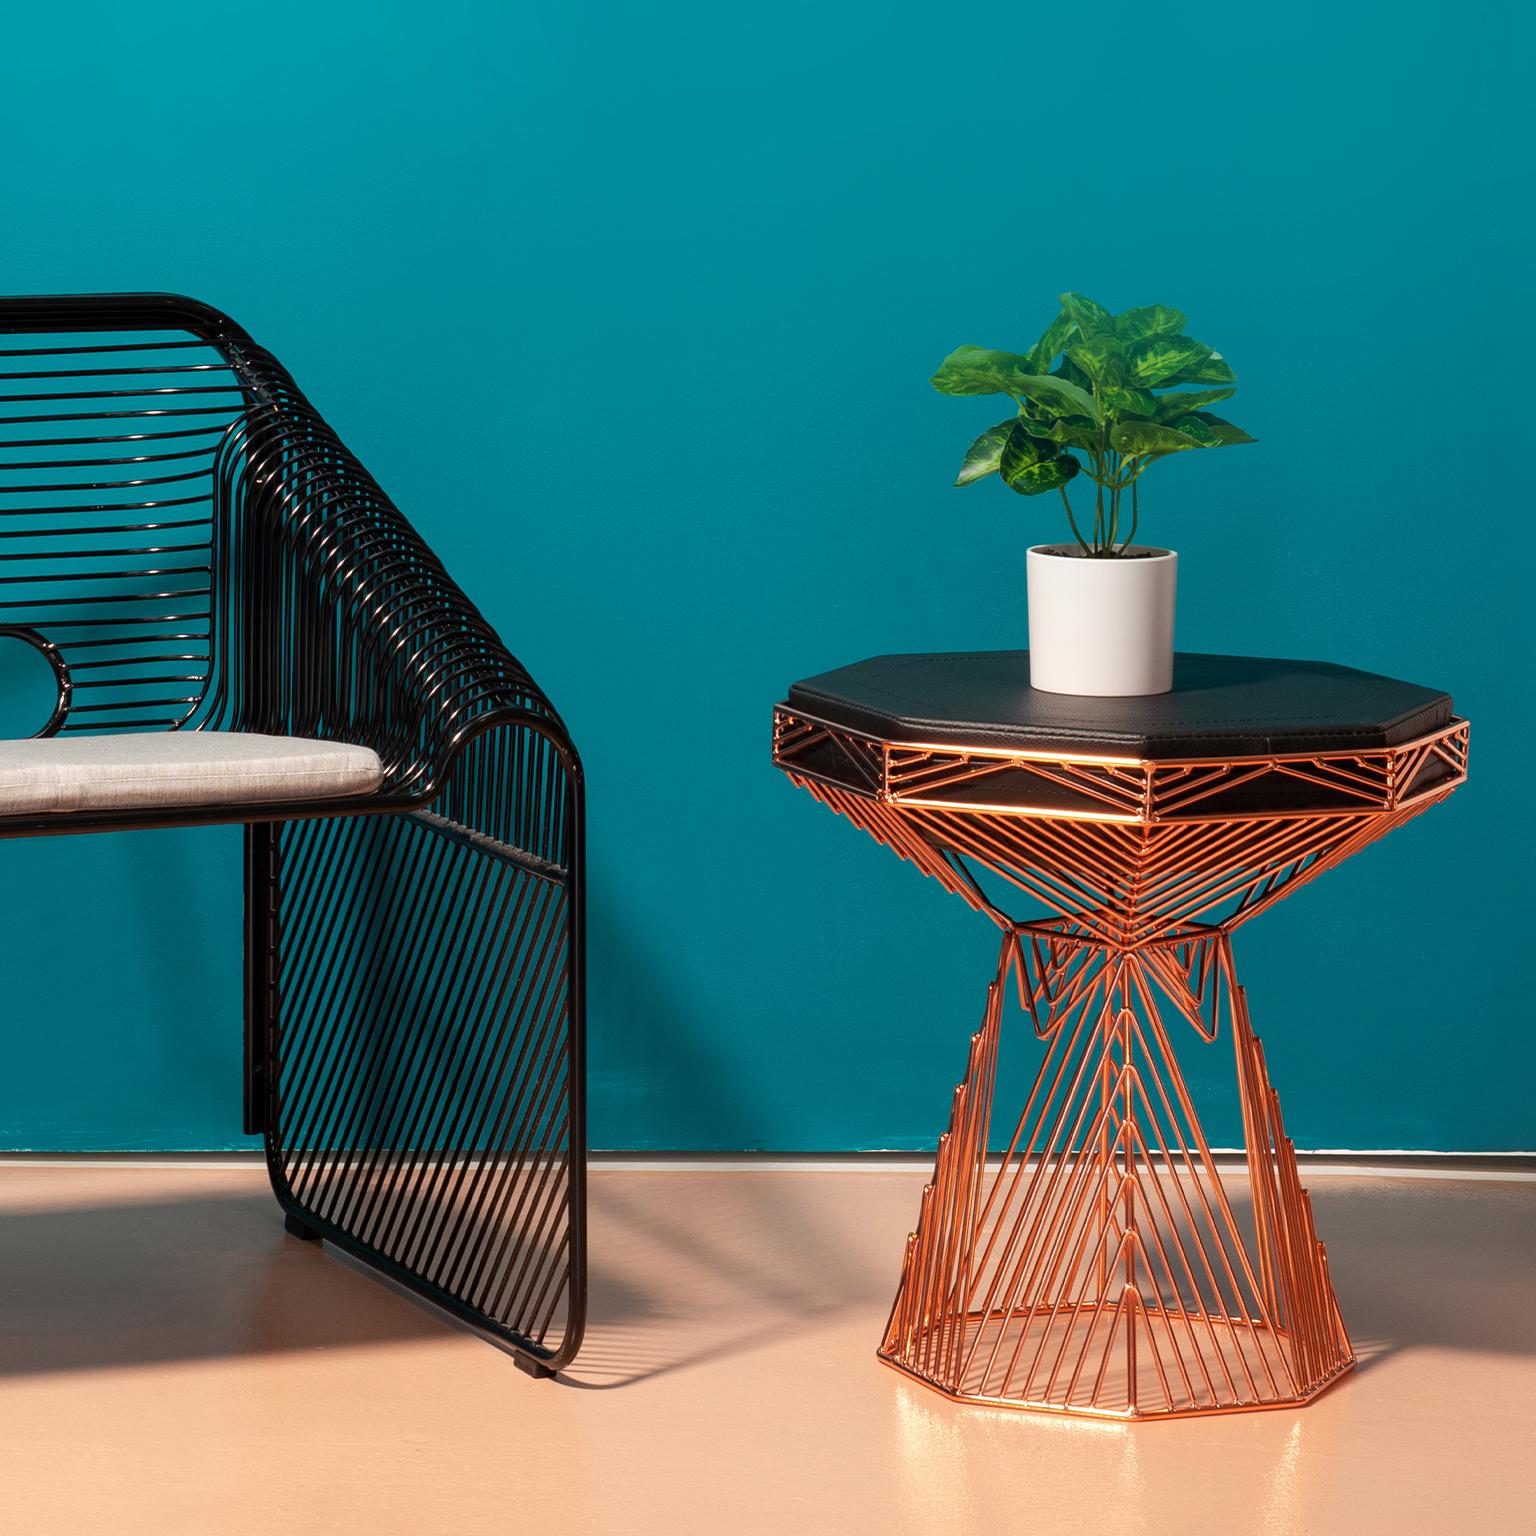 Bend Goods Wire Furniture
The ultimate in versatile modern wire furniture, The Switch table and stool is a two in one piece that works as a stool or table. The tabletop features a padded leather seat on one side, and a flat table surface on the